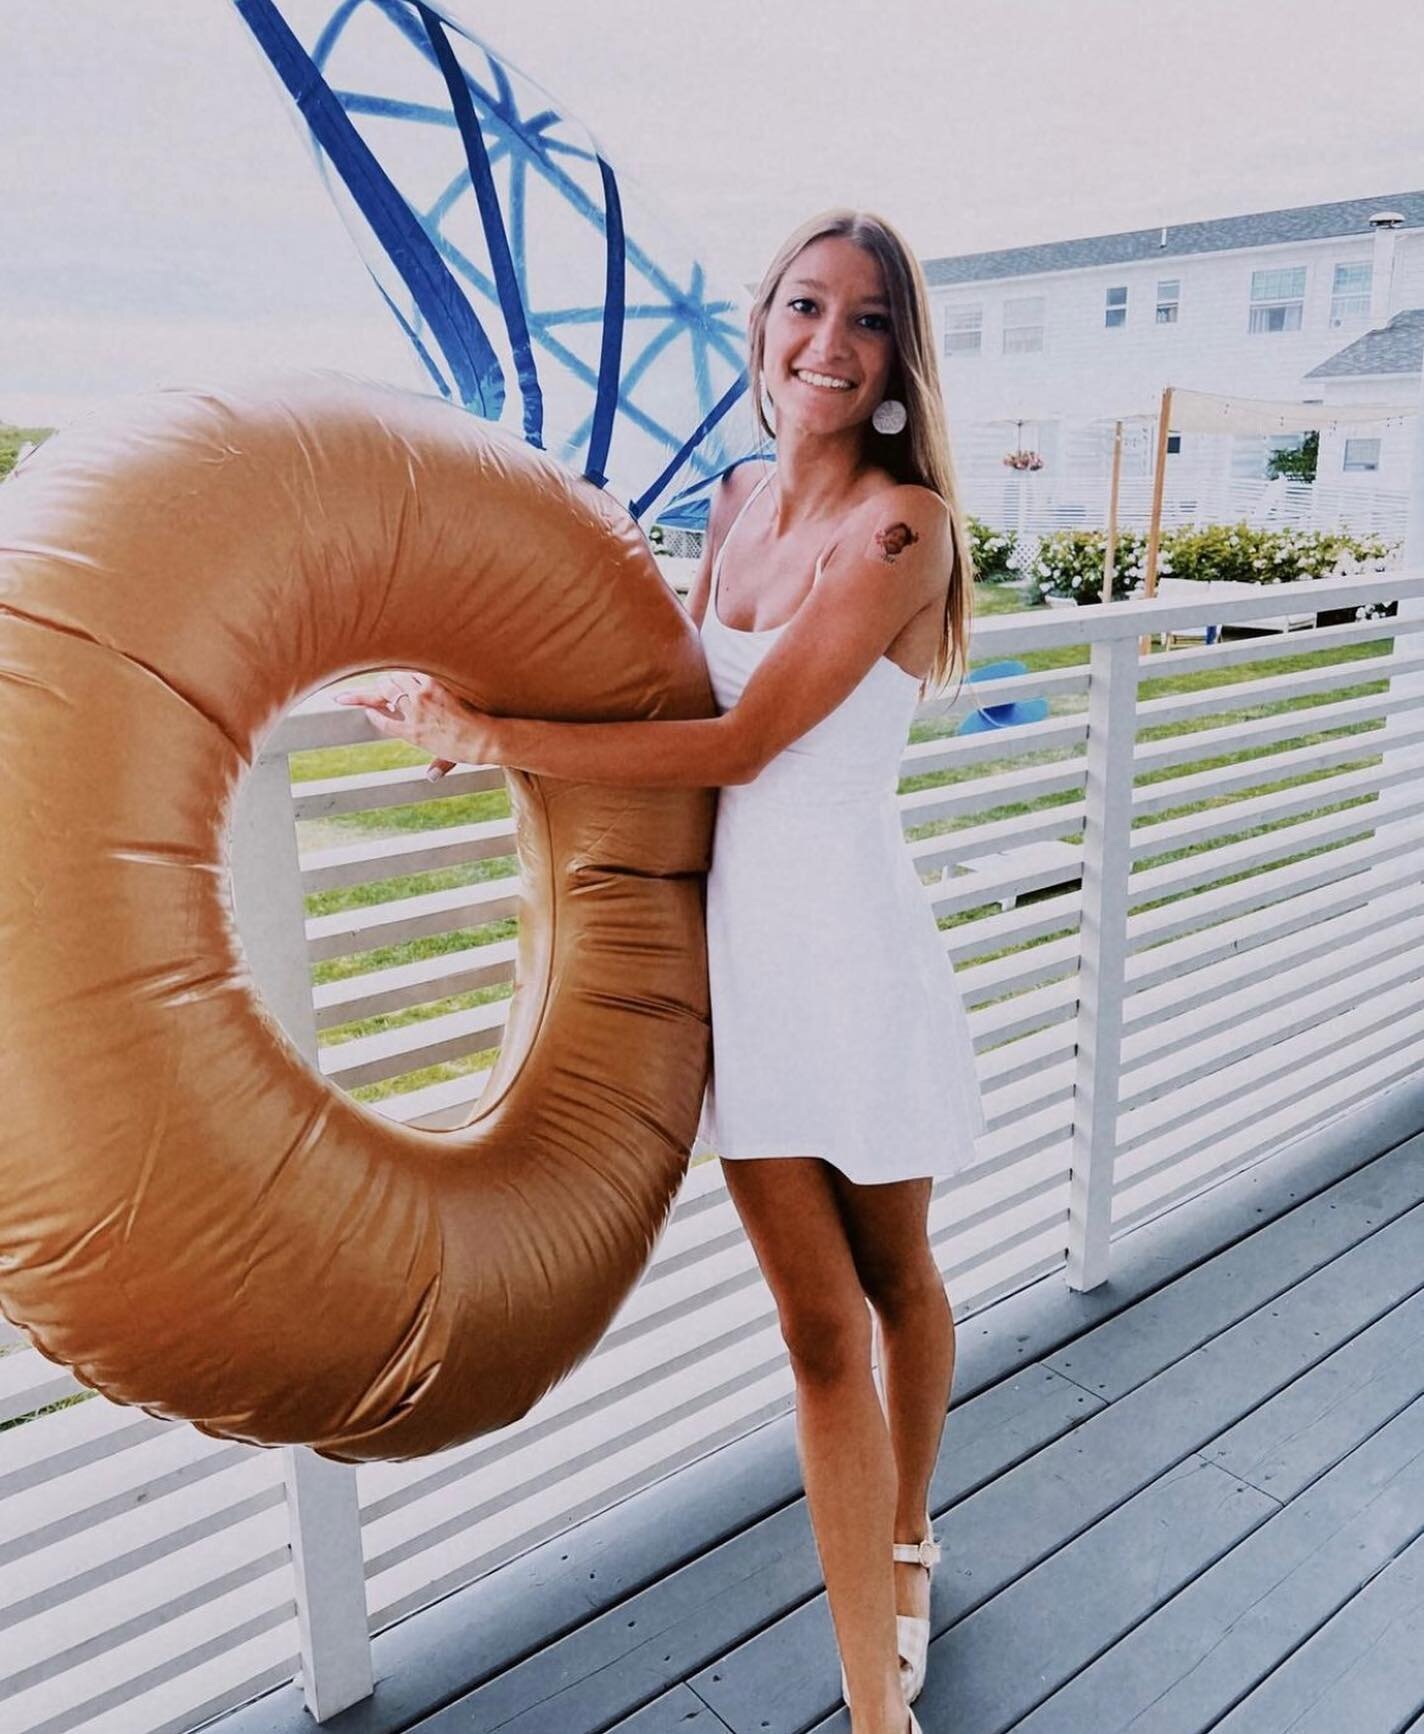 Clay + Oak hit Montauk for a fabulous bride-to-be&rsquo;s bach!

Do you spy with ever so popular Sand Dollar Dangle?? Congrats to the soon-to-be Mrs., @gabrielleaaa! 🤍

xo
Clay + Oak